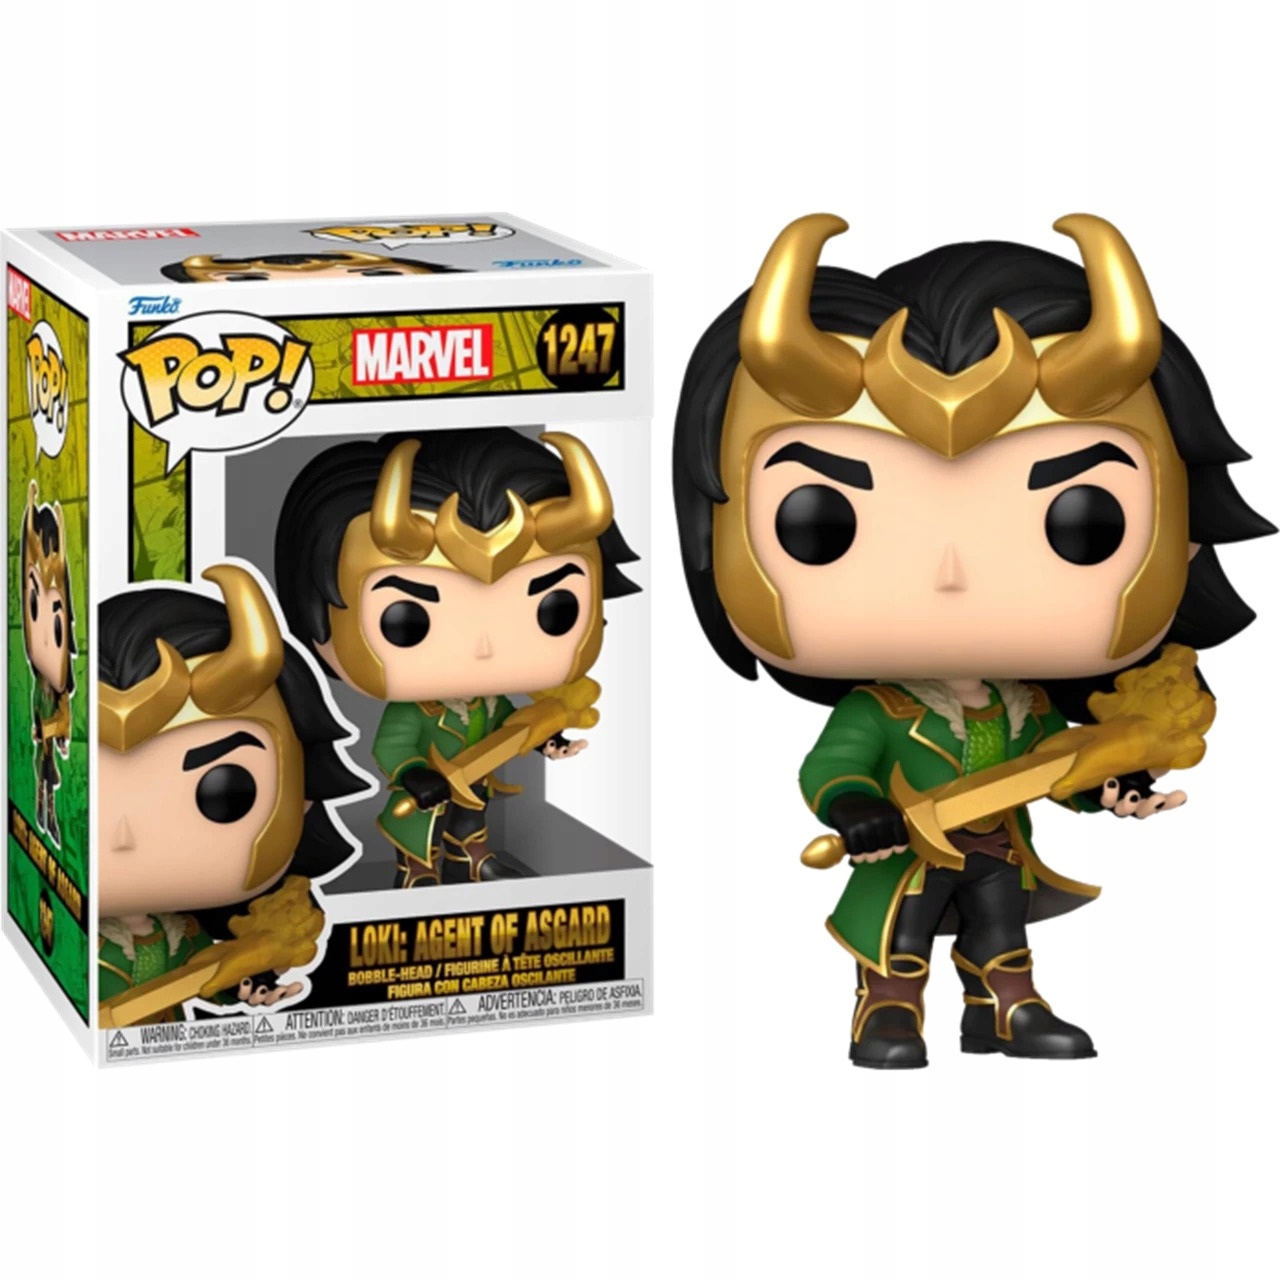 Funko Europe on X: Let adventure reign in your Marvel set. Bring home a Pop!  Deluxe God Loki bobblehead, seated on his throne. Coming soon – be the  first to know when